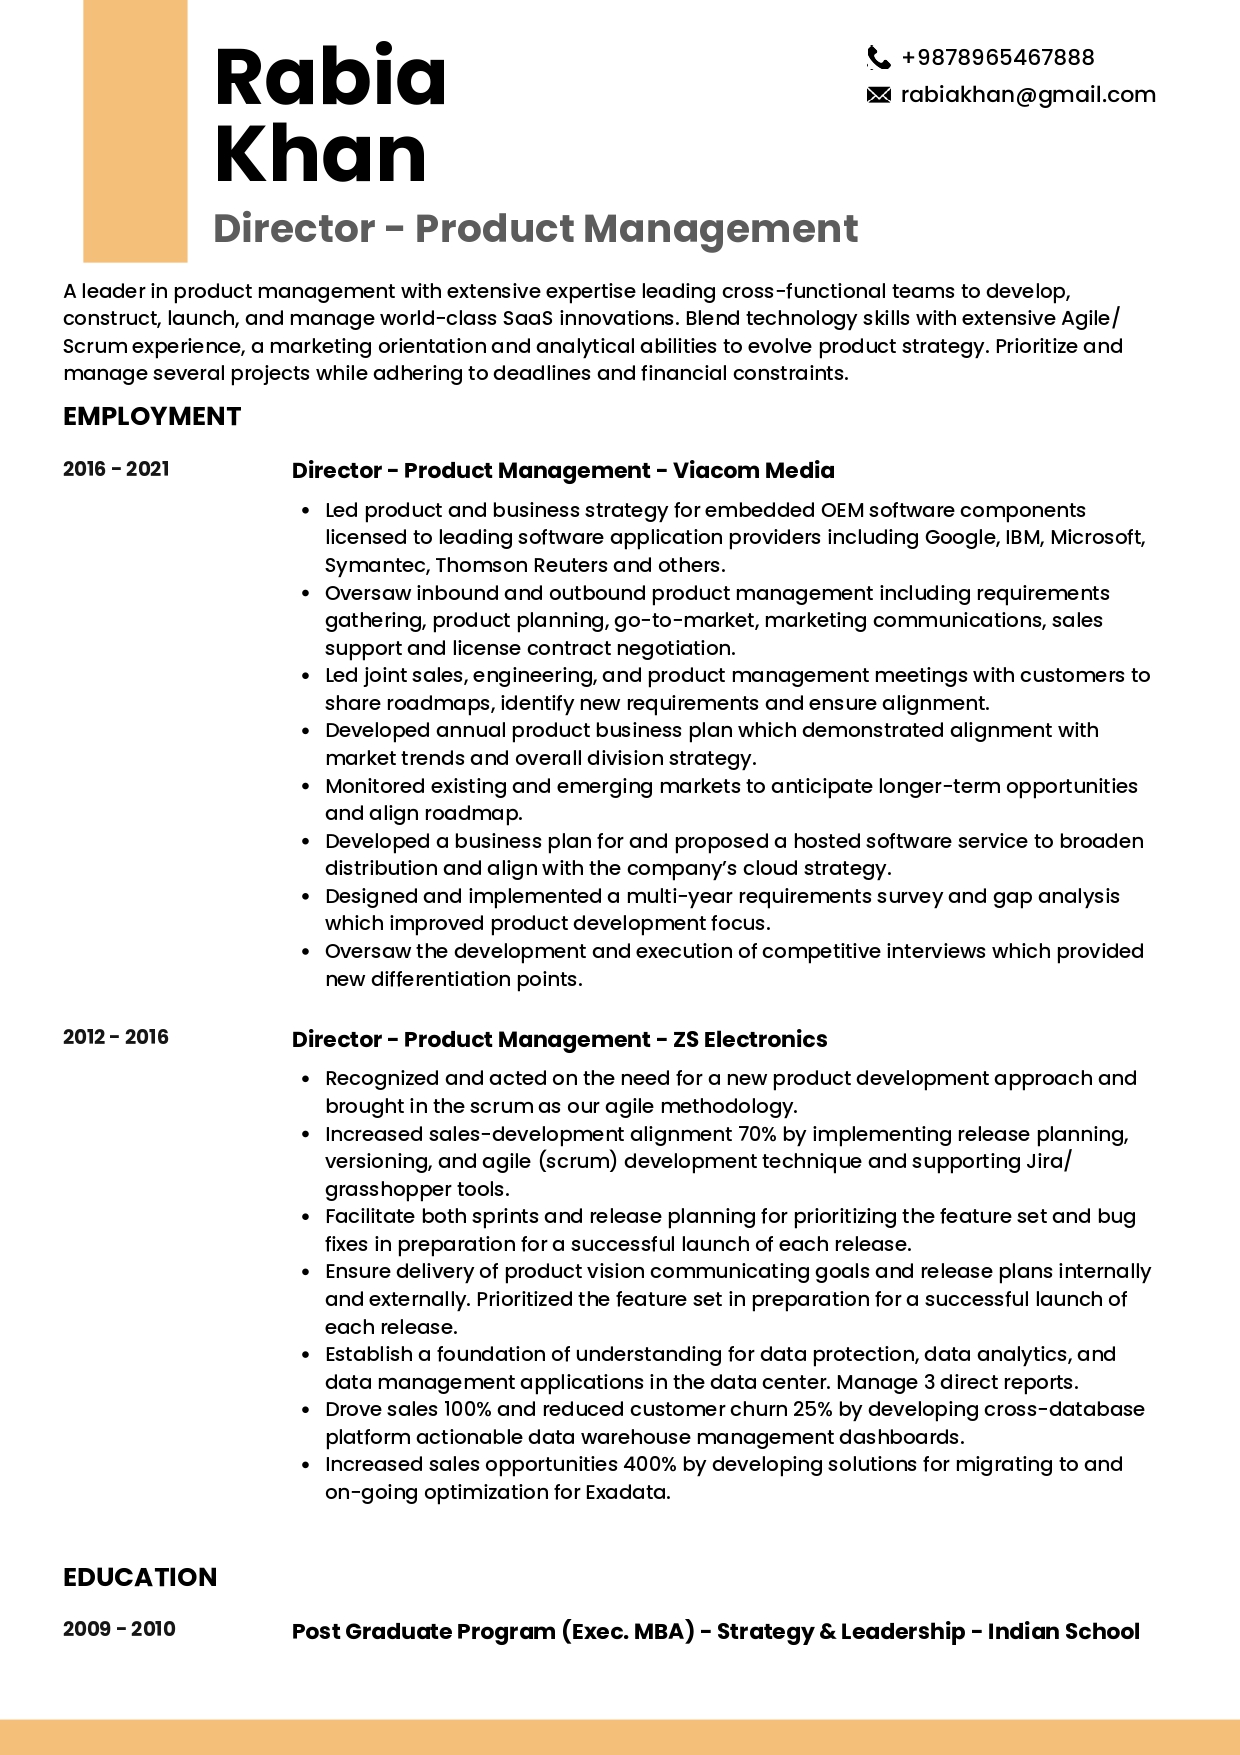 Sample Resume of Director of Product Management | Free Resume Templates & Samples on Resumod.co